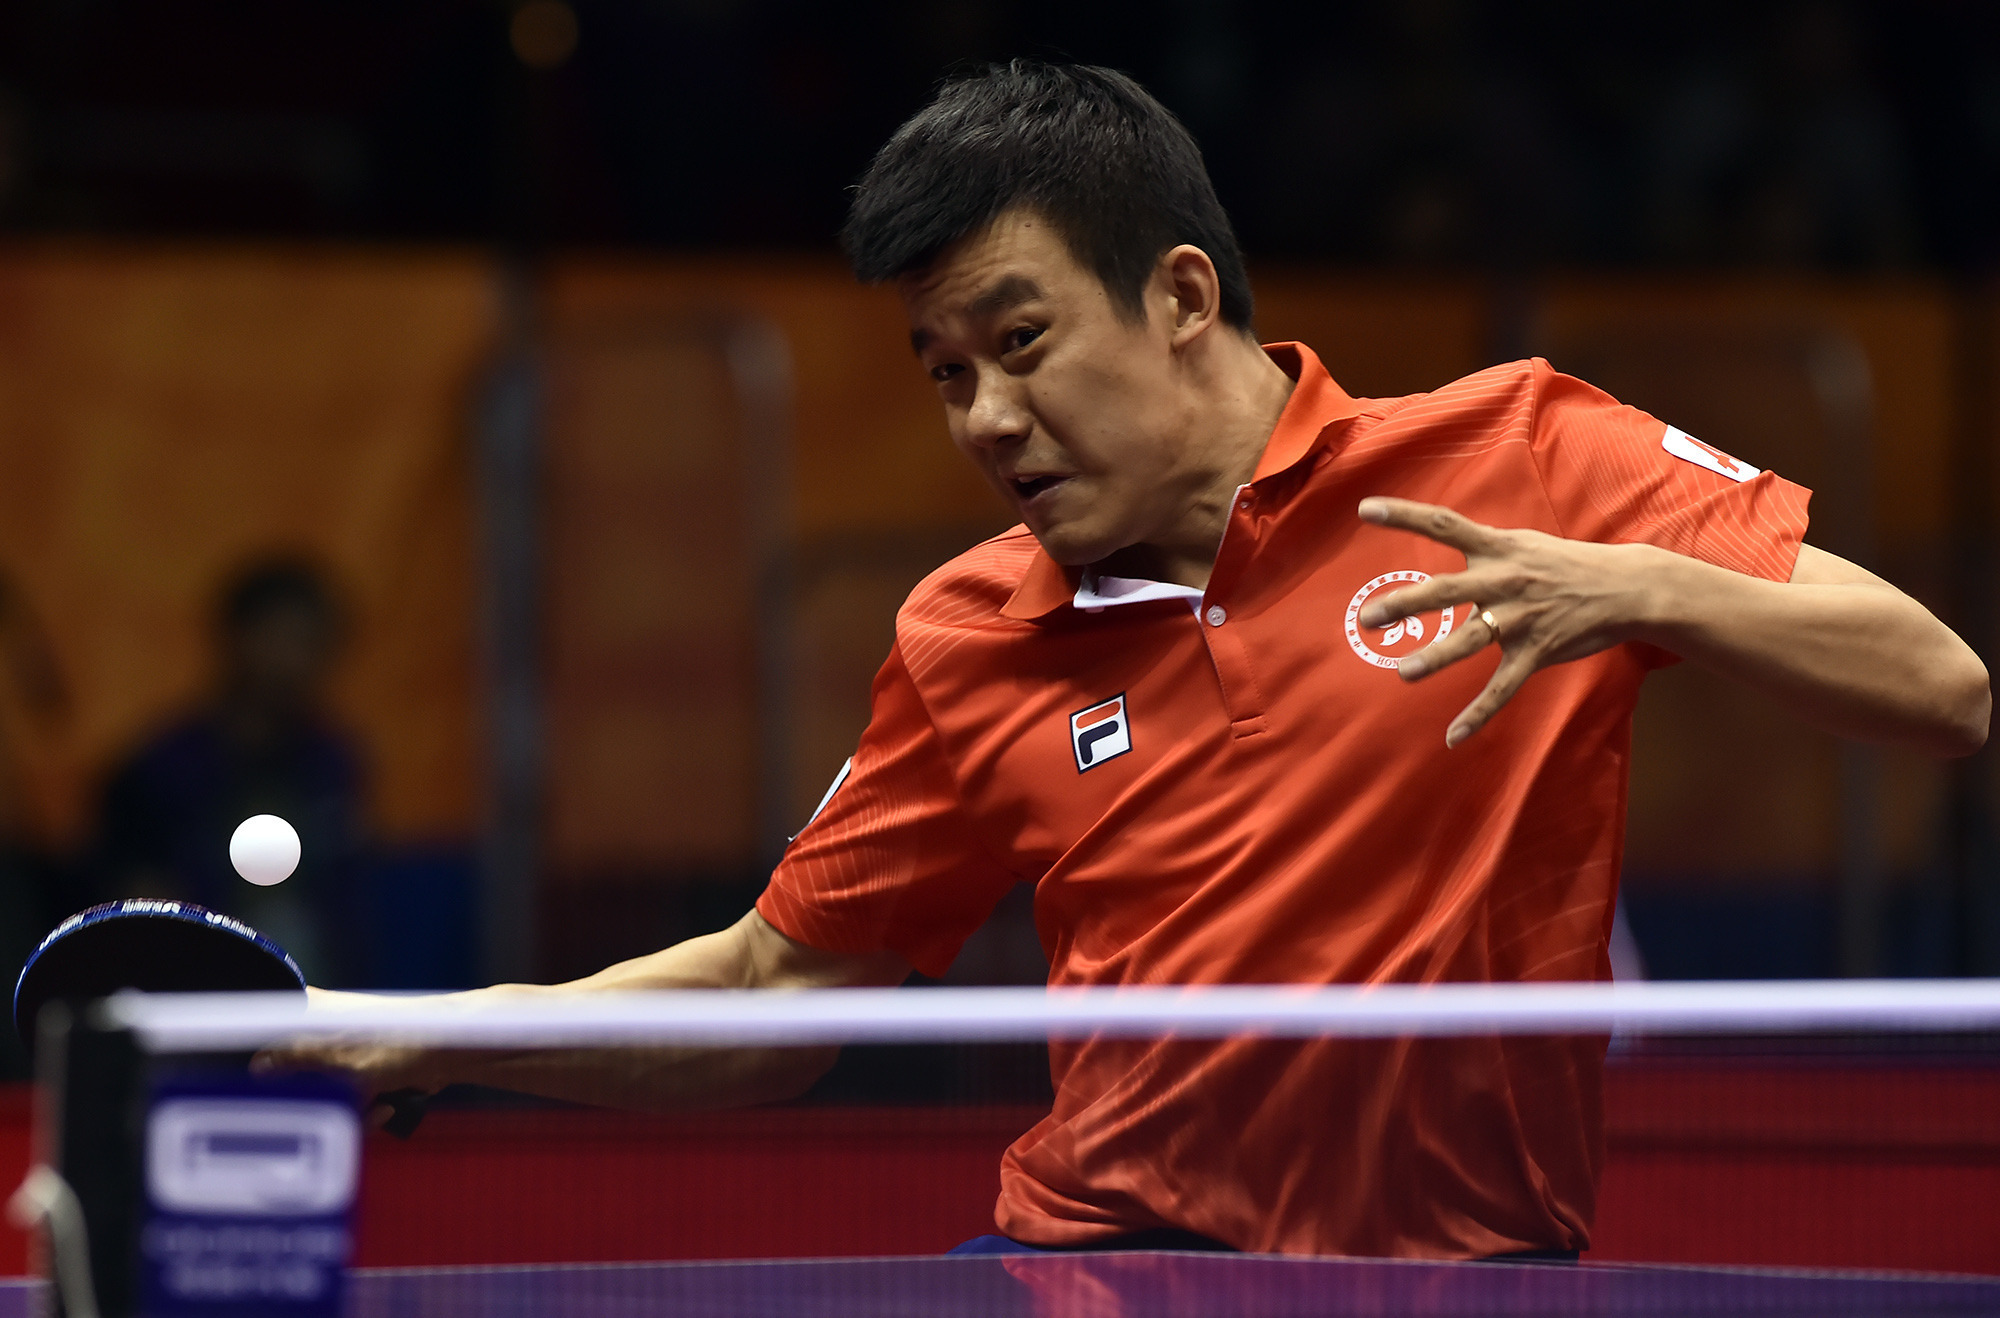 Hong Kong's Tang Peng, ranked No 13 in the world, has lived up to expectations to reach the quarter-finals of the men's singles at the Table Tennis World Championships in Suzhou. Photos: Xinhua